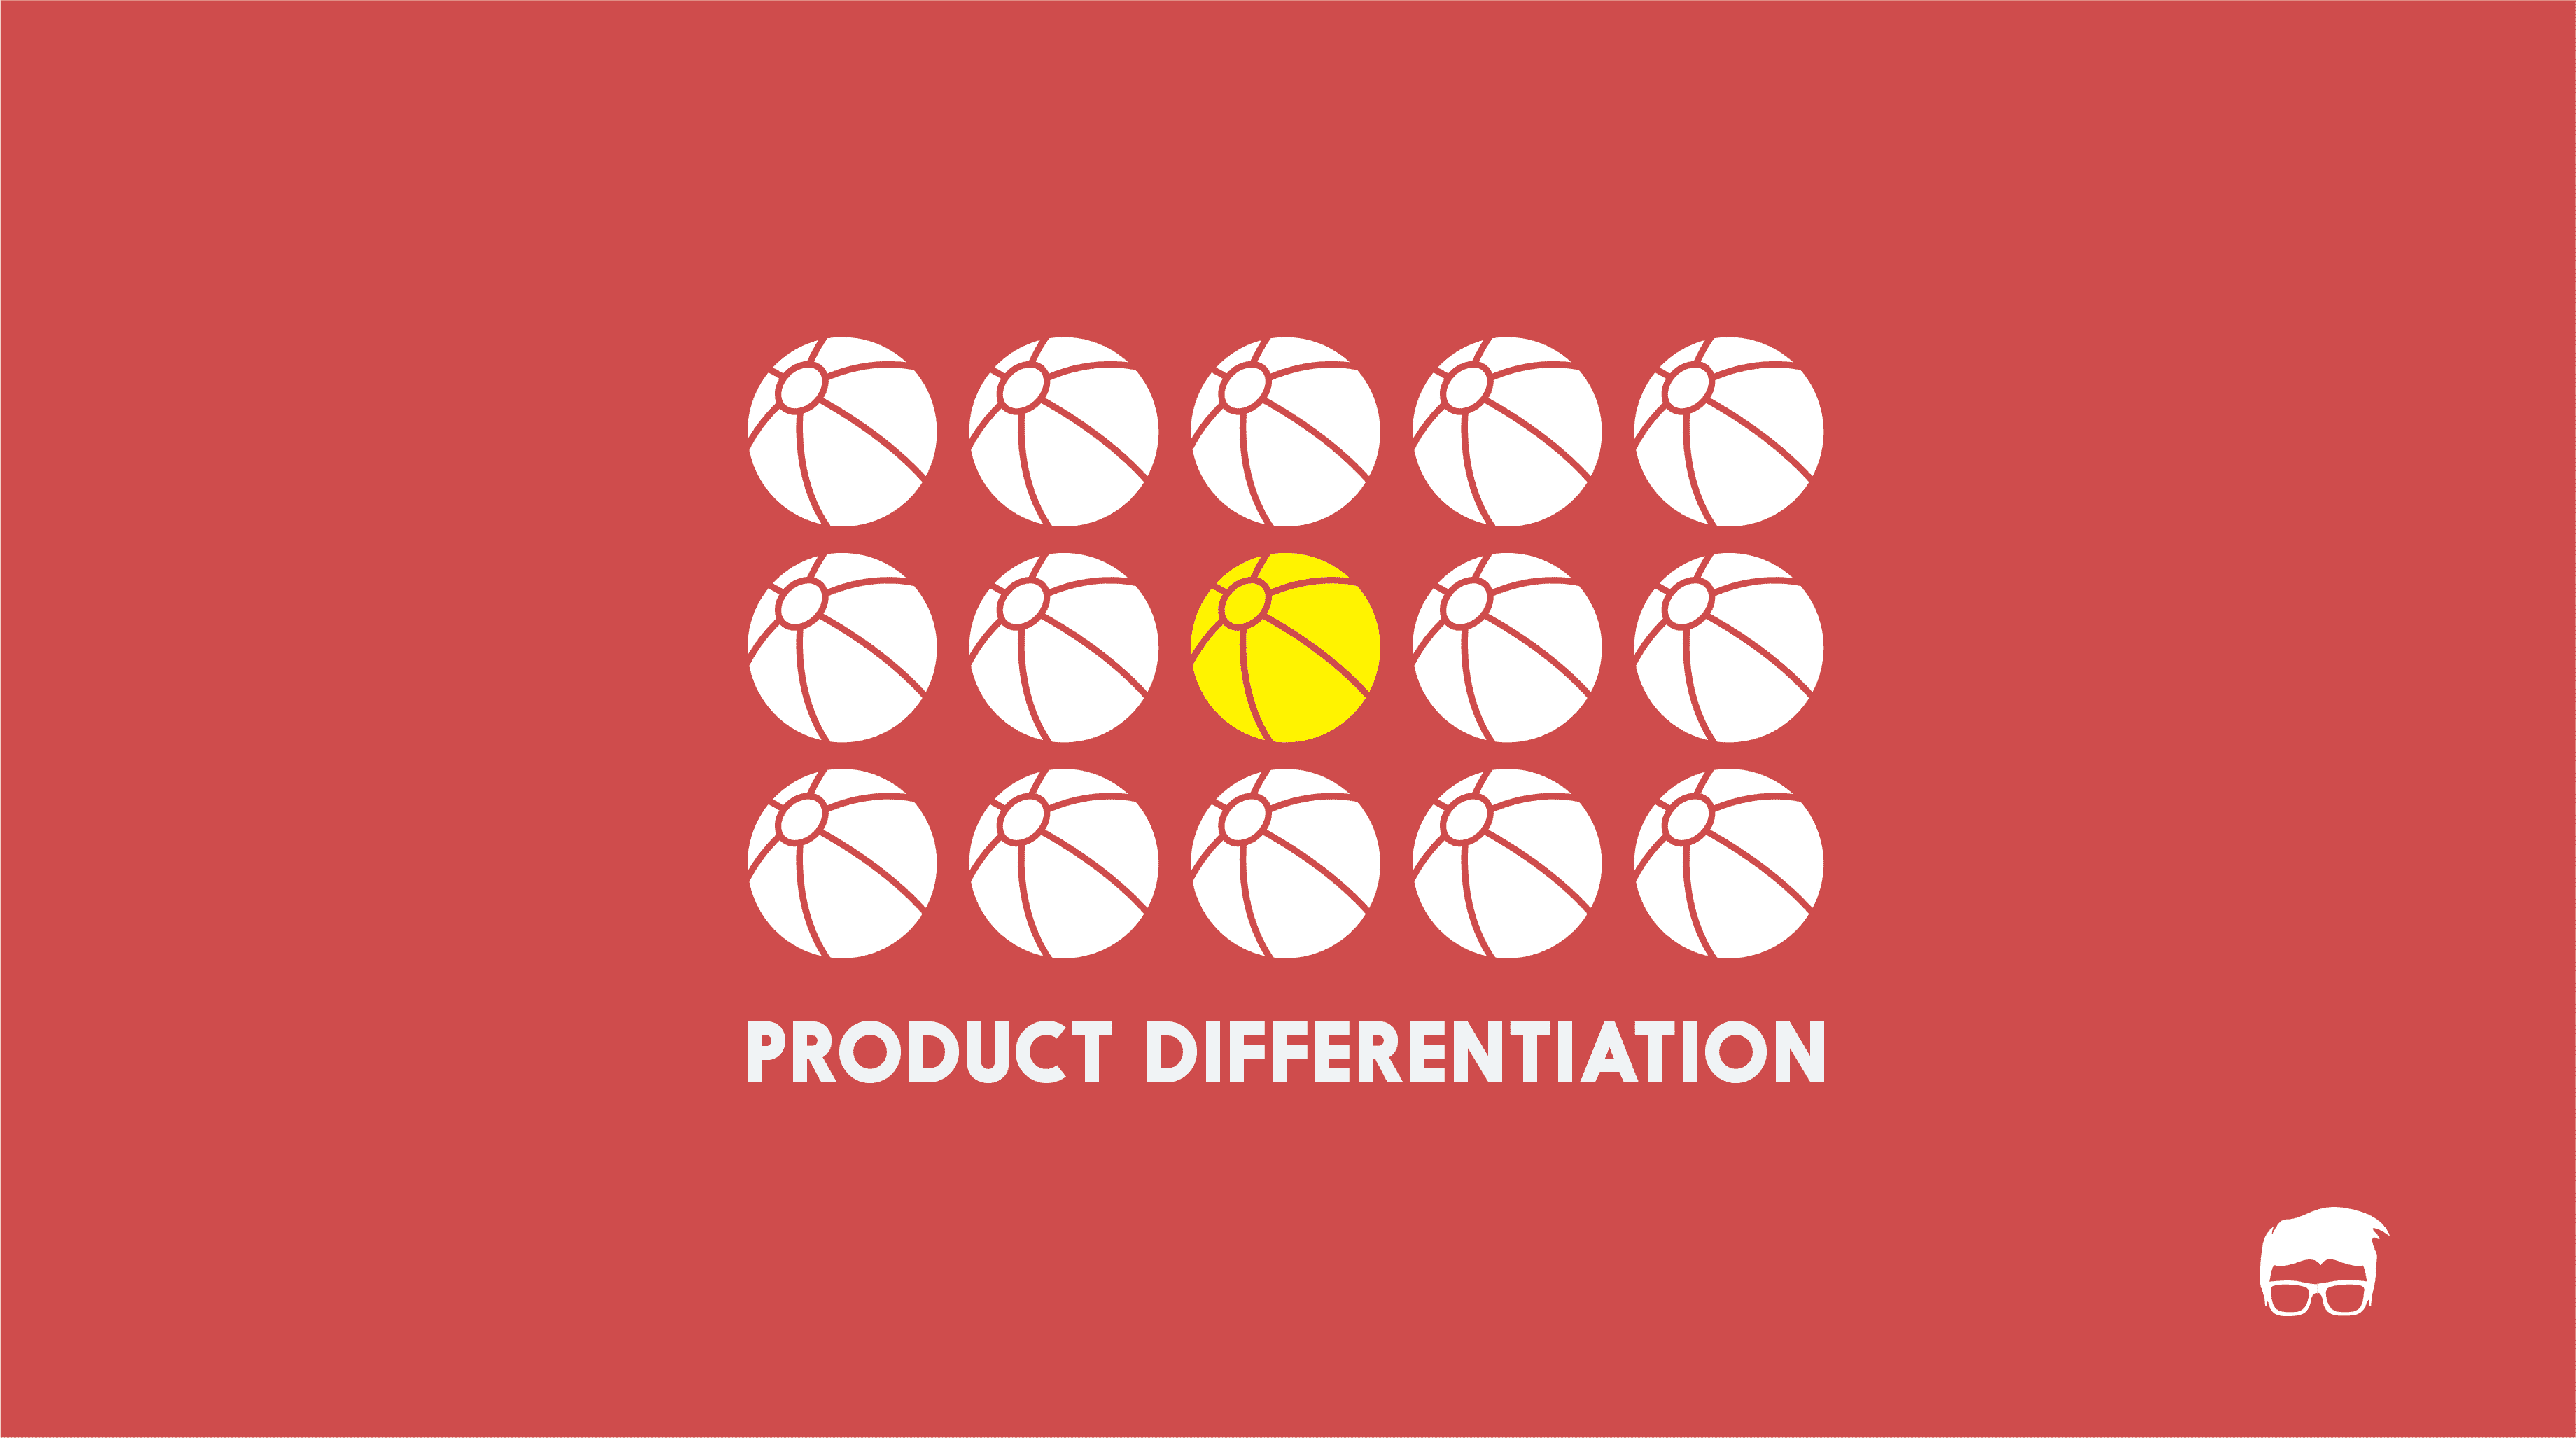 PRODUCT DIFFERENTIATION